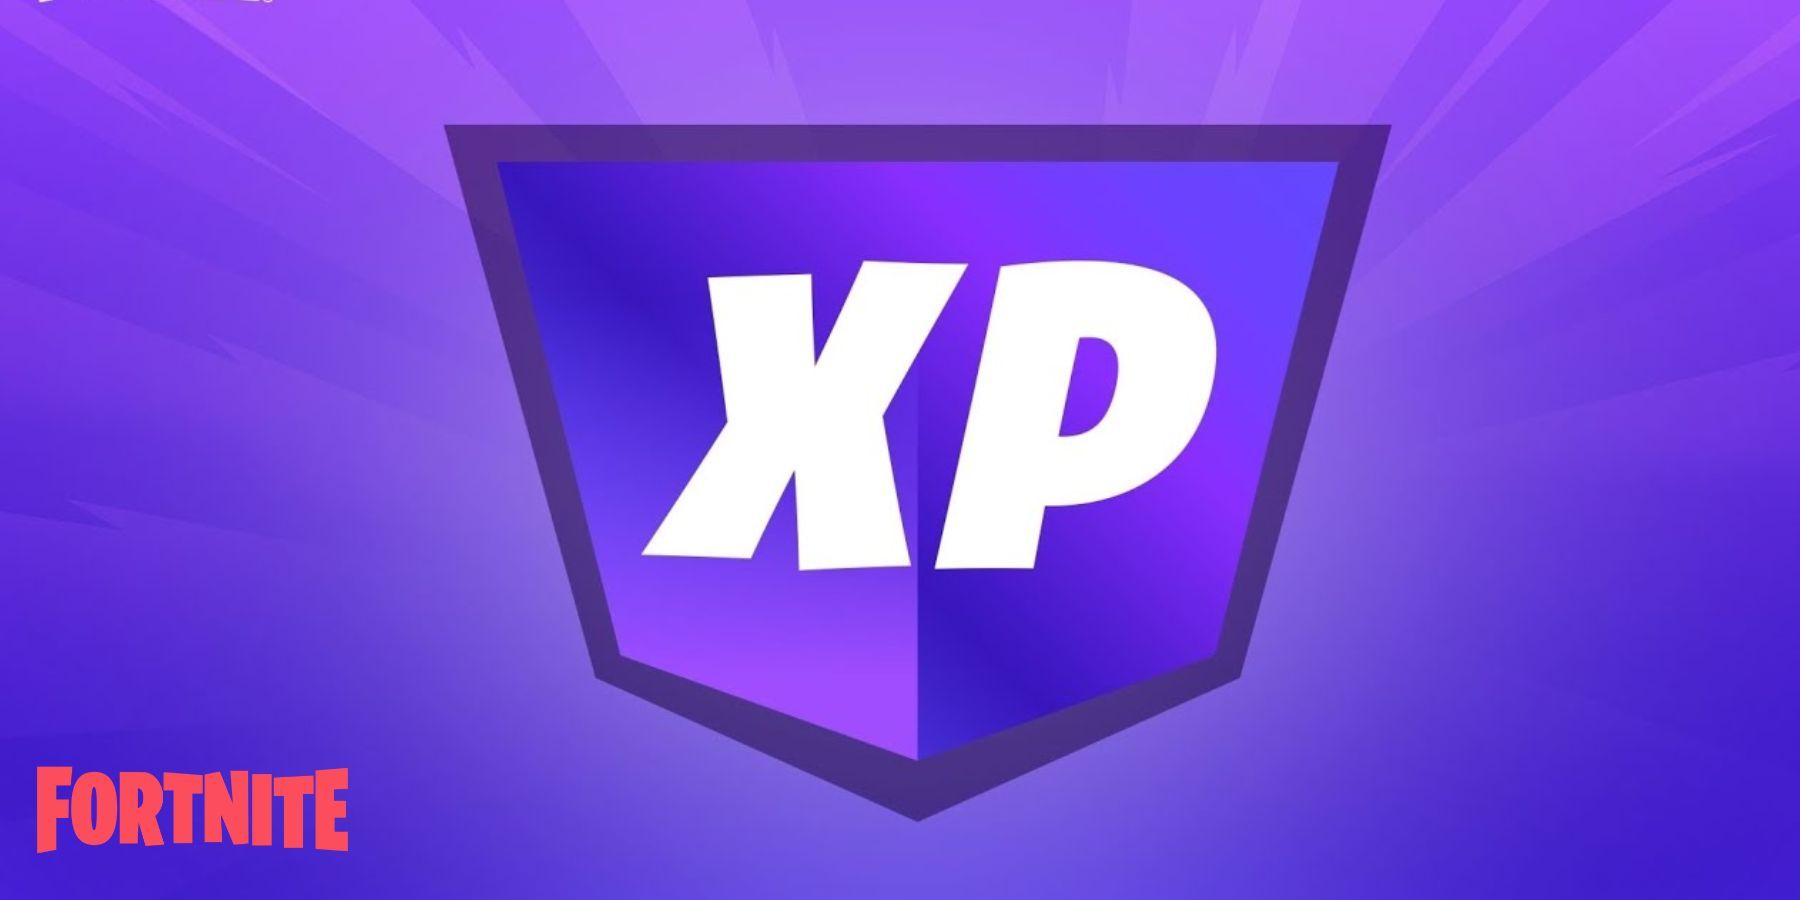 Fortnite Experience Points as rewards